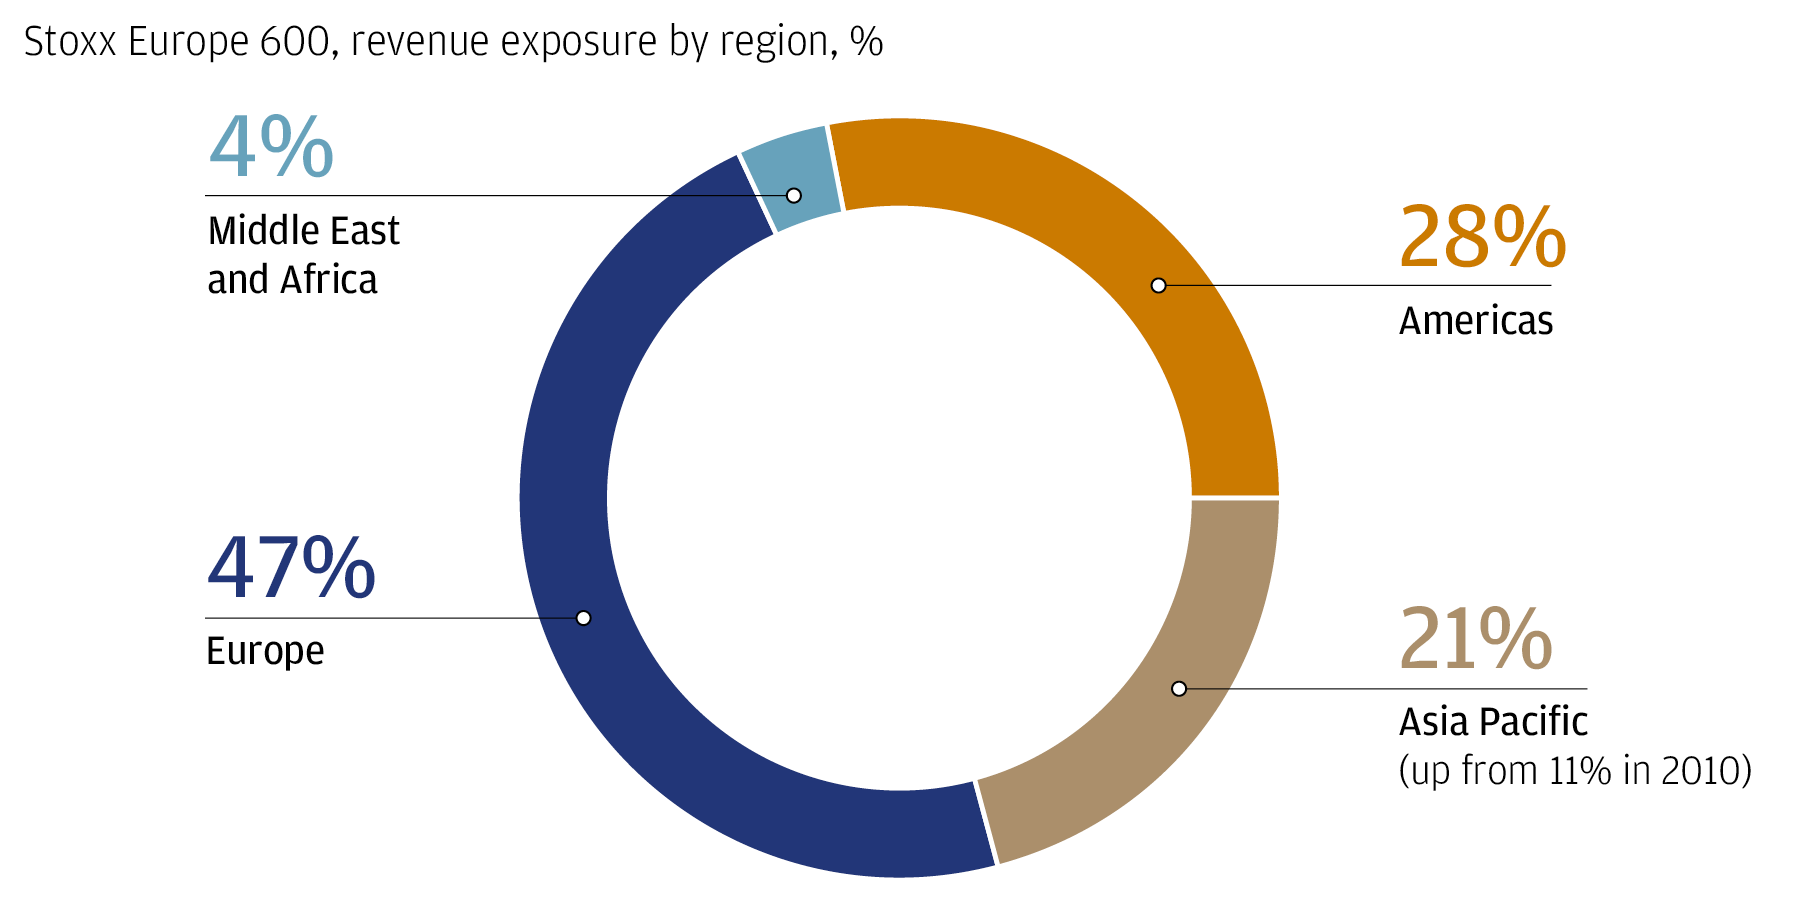 This pie chart shows Stoxx Europe 600's revenue exposure by region.